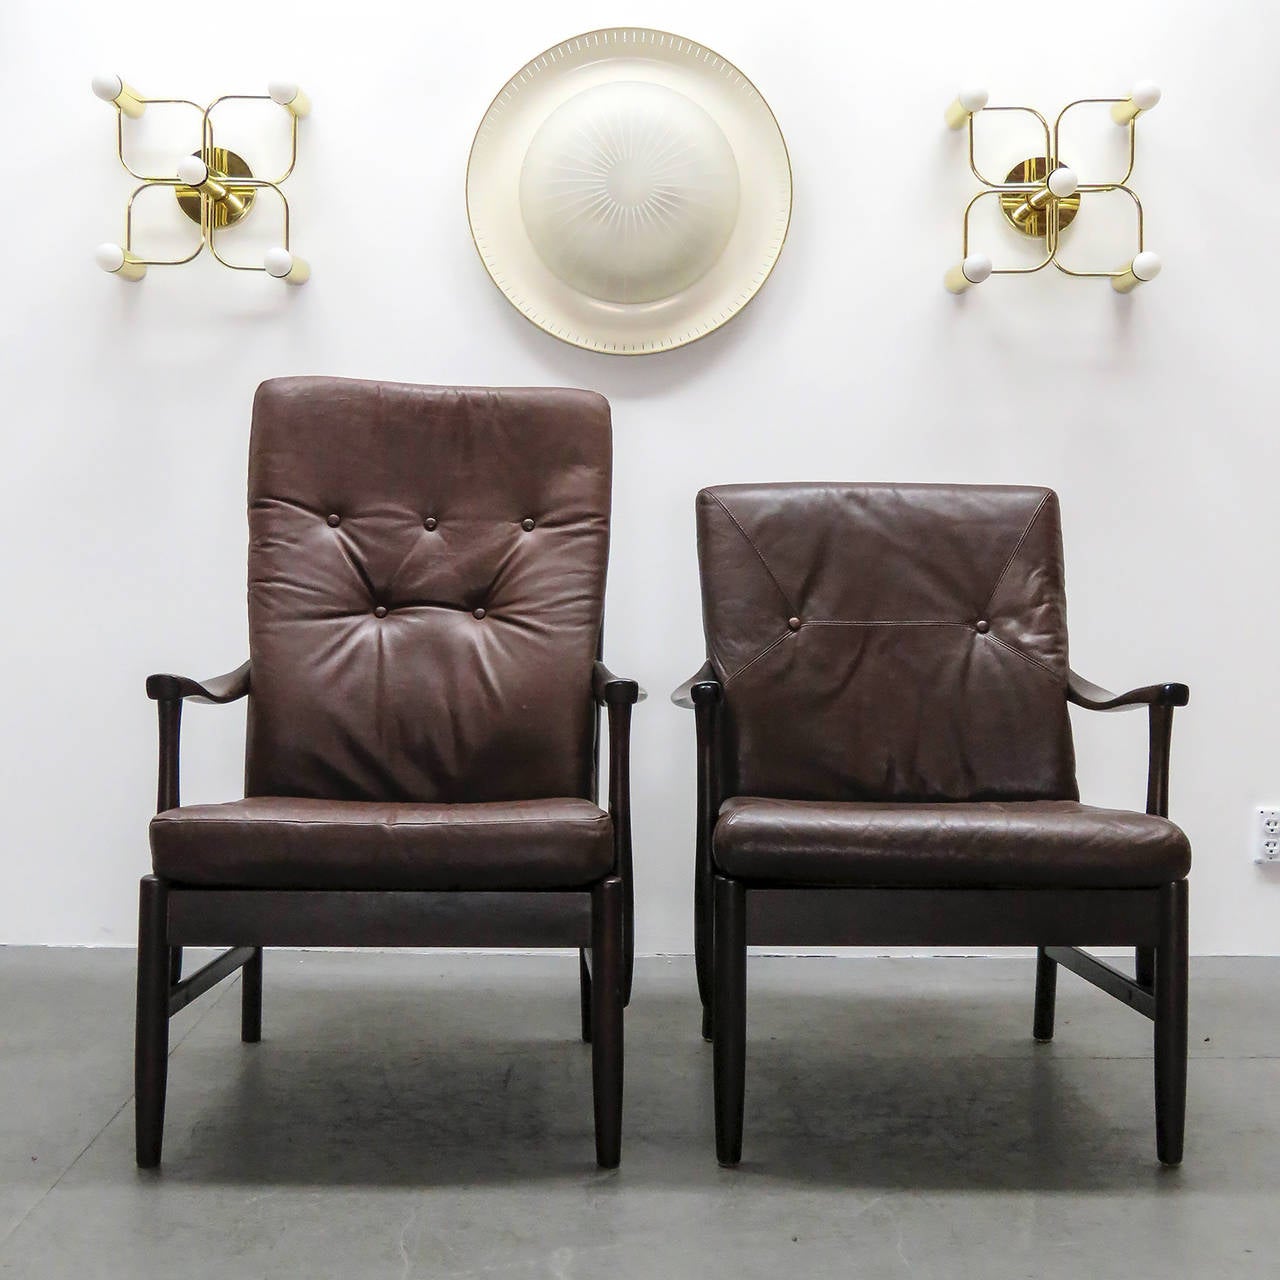 Wonderful set of Danish leather side chairs in style of Ole Wanscher, matching high and low back versions, solid dark beech frames with chocolate colored, tufted leather cushions, measurements for the high chair, low chair height: 34